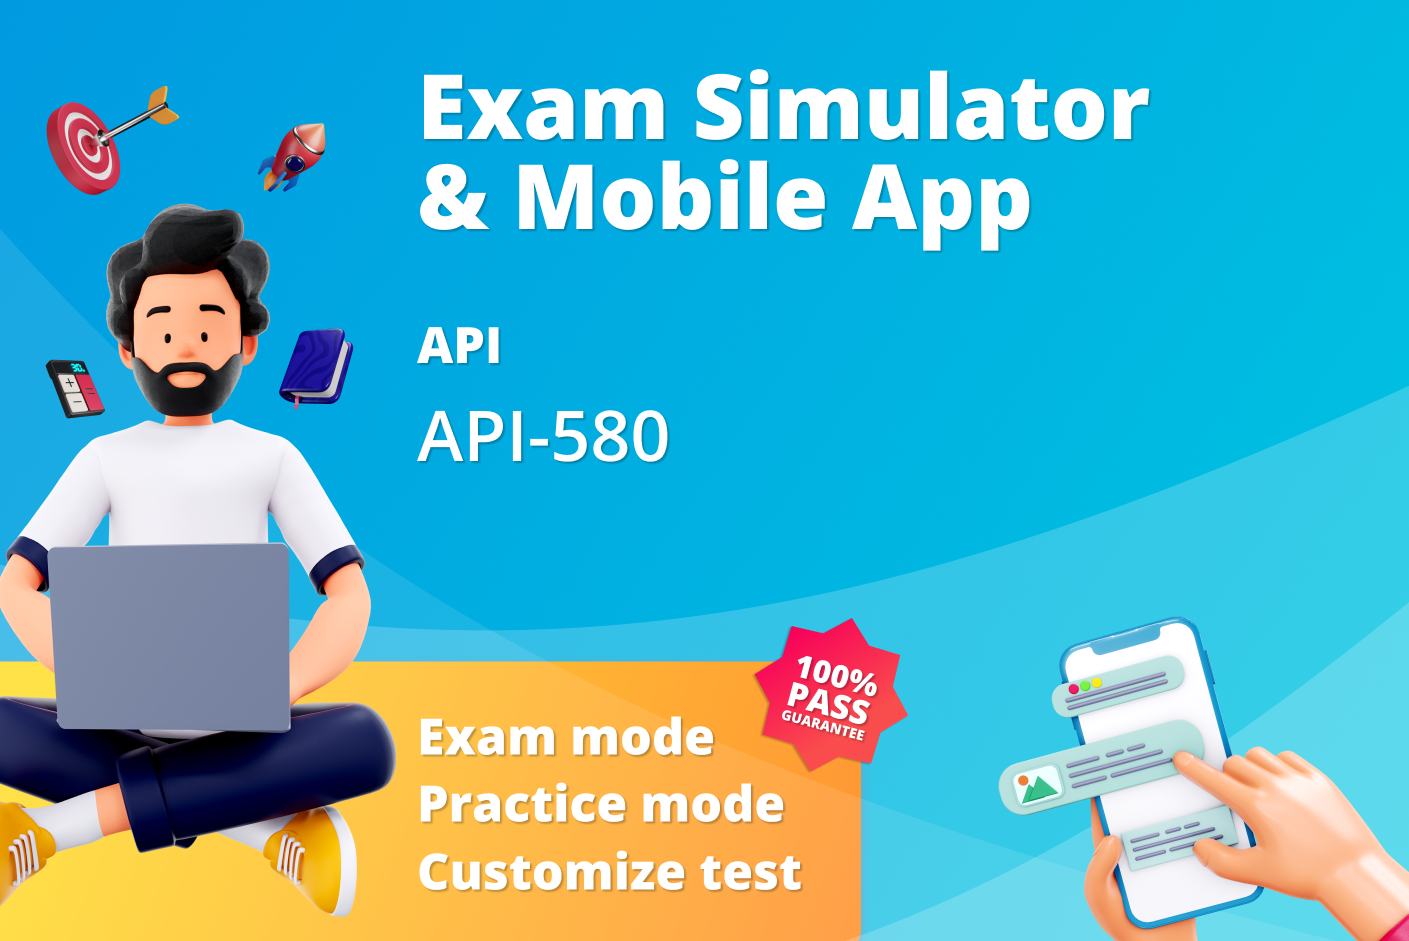 Prepare for success with our challenging API-580 mock exam, designed to help you ace the official test